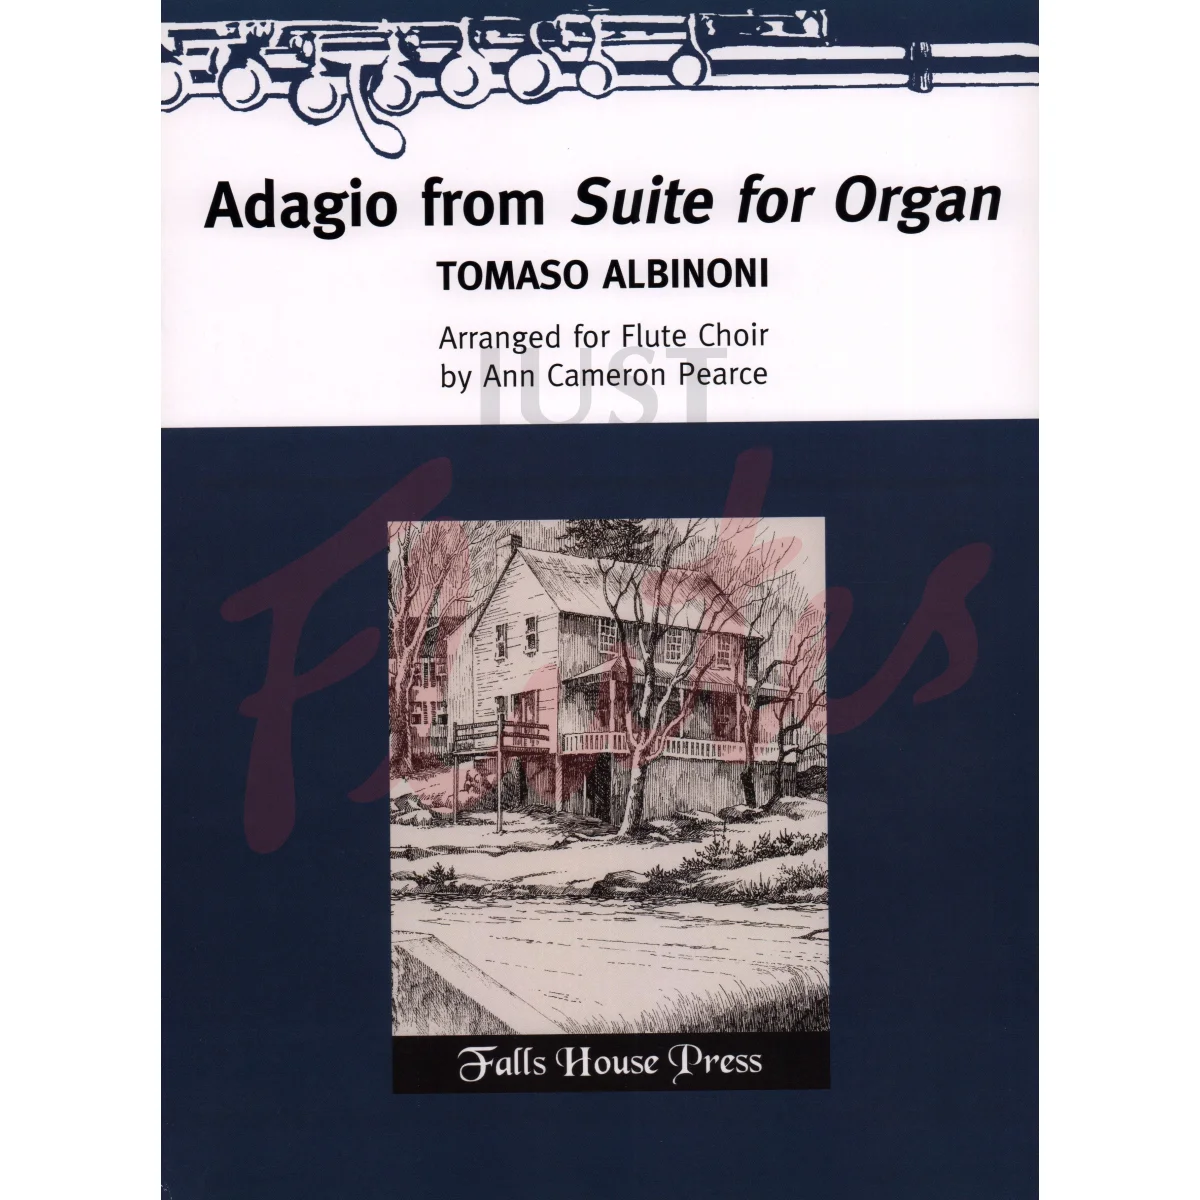 Adagio from Suite for Organ arranged for Flute Choir